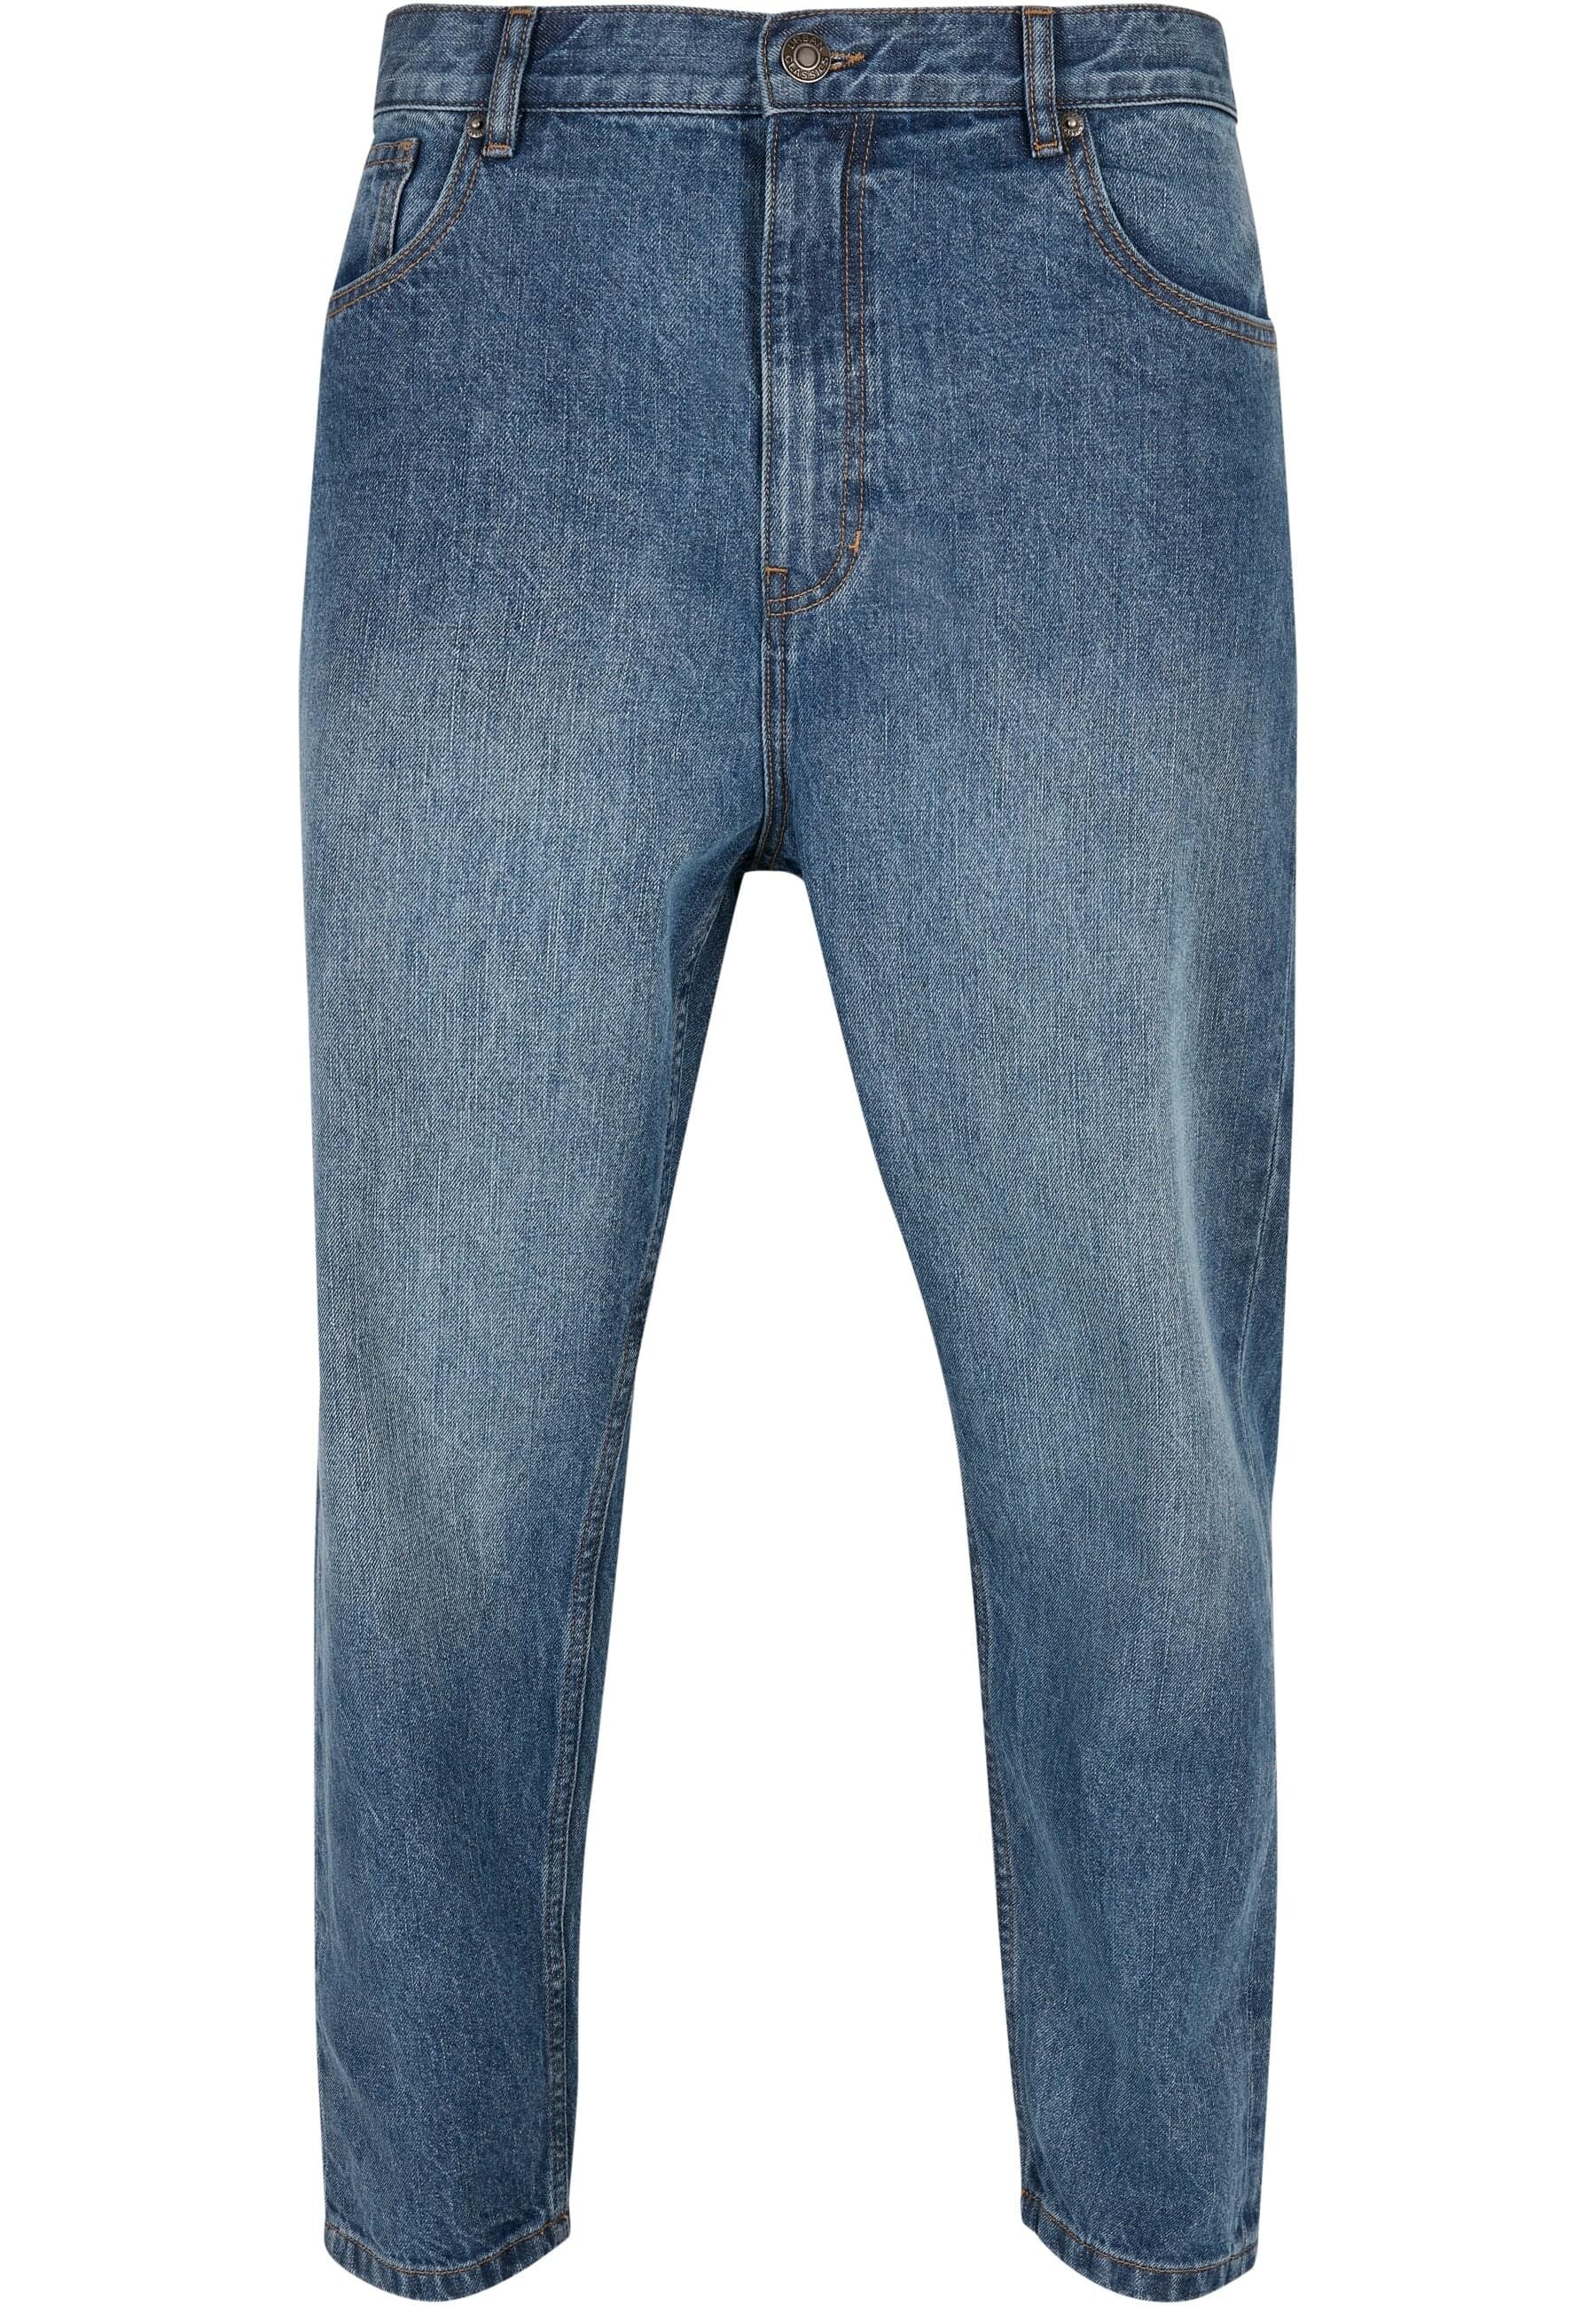 Bequeme Jeans »Urban Classics Herren Cropped Tapered Jeans«, (1 tlg.)